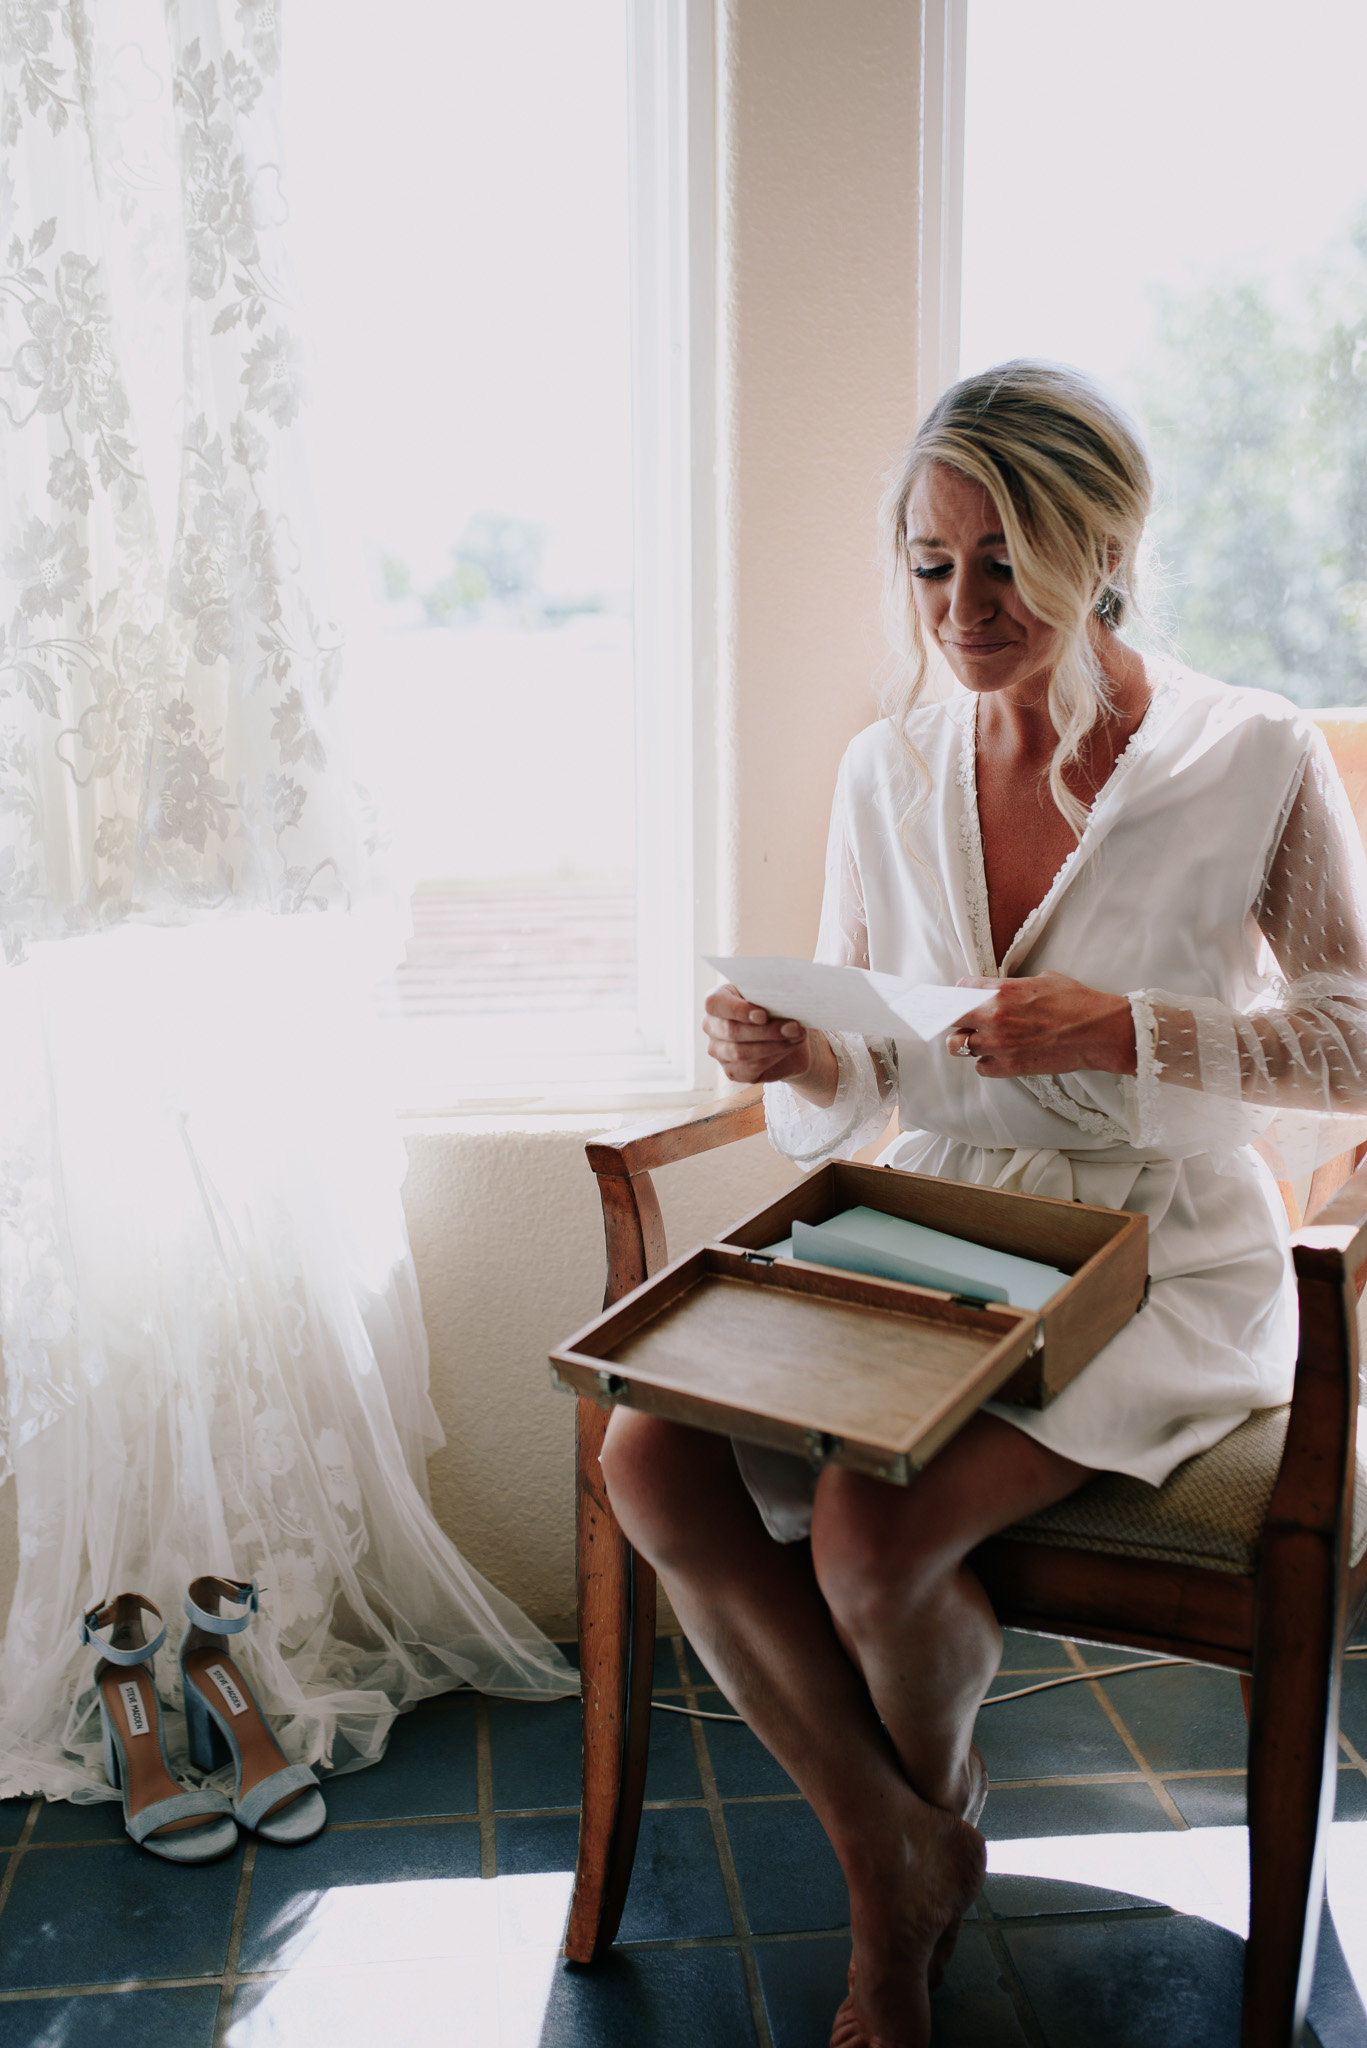 Bride opening a touching gift before her wedding in her bridal suite at a Winery in Wyoming.